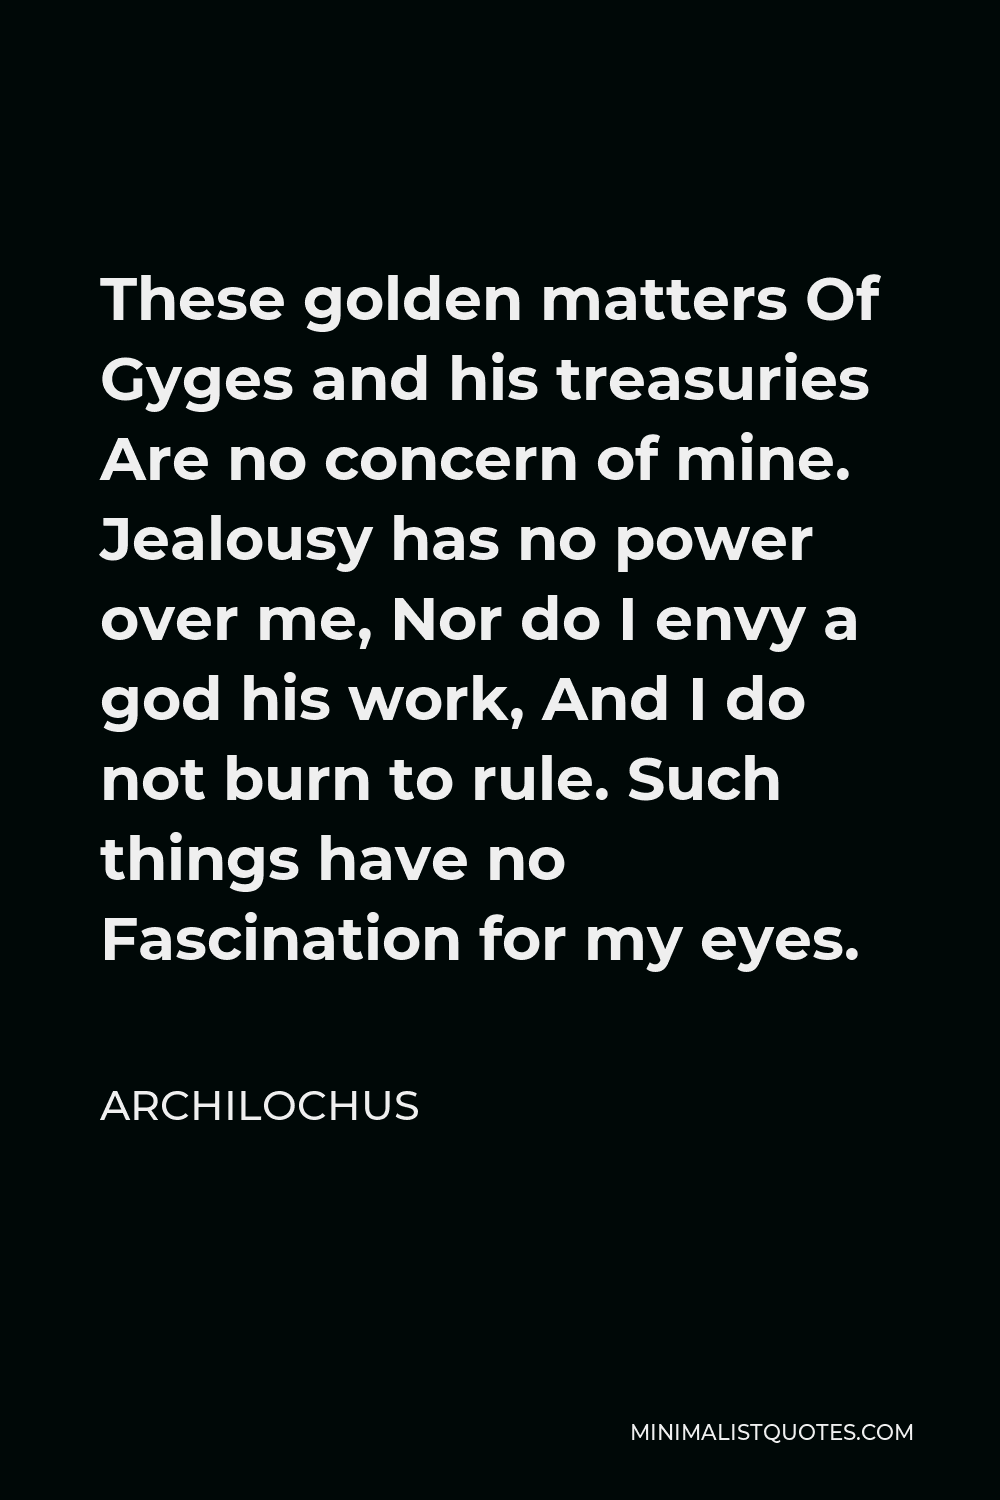 Archilochus Quote - These golden matters Of Gyges and his treasuries Are no concern of mine. Jealousy has no power over me, Nor do I envy a god his work, And I do not burn to rule. Such things have no Fascination for my eyes.